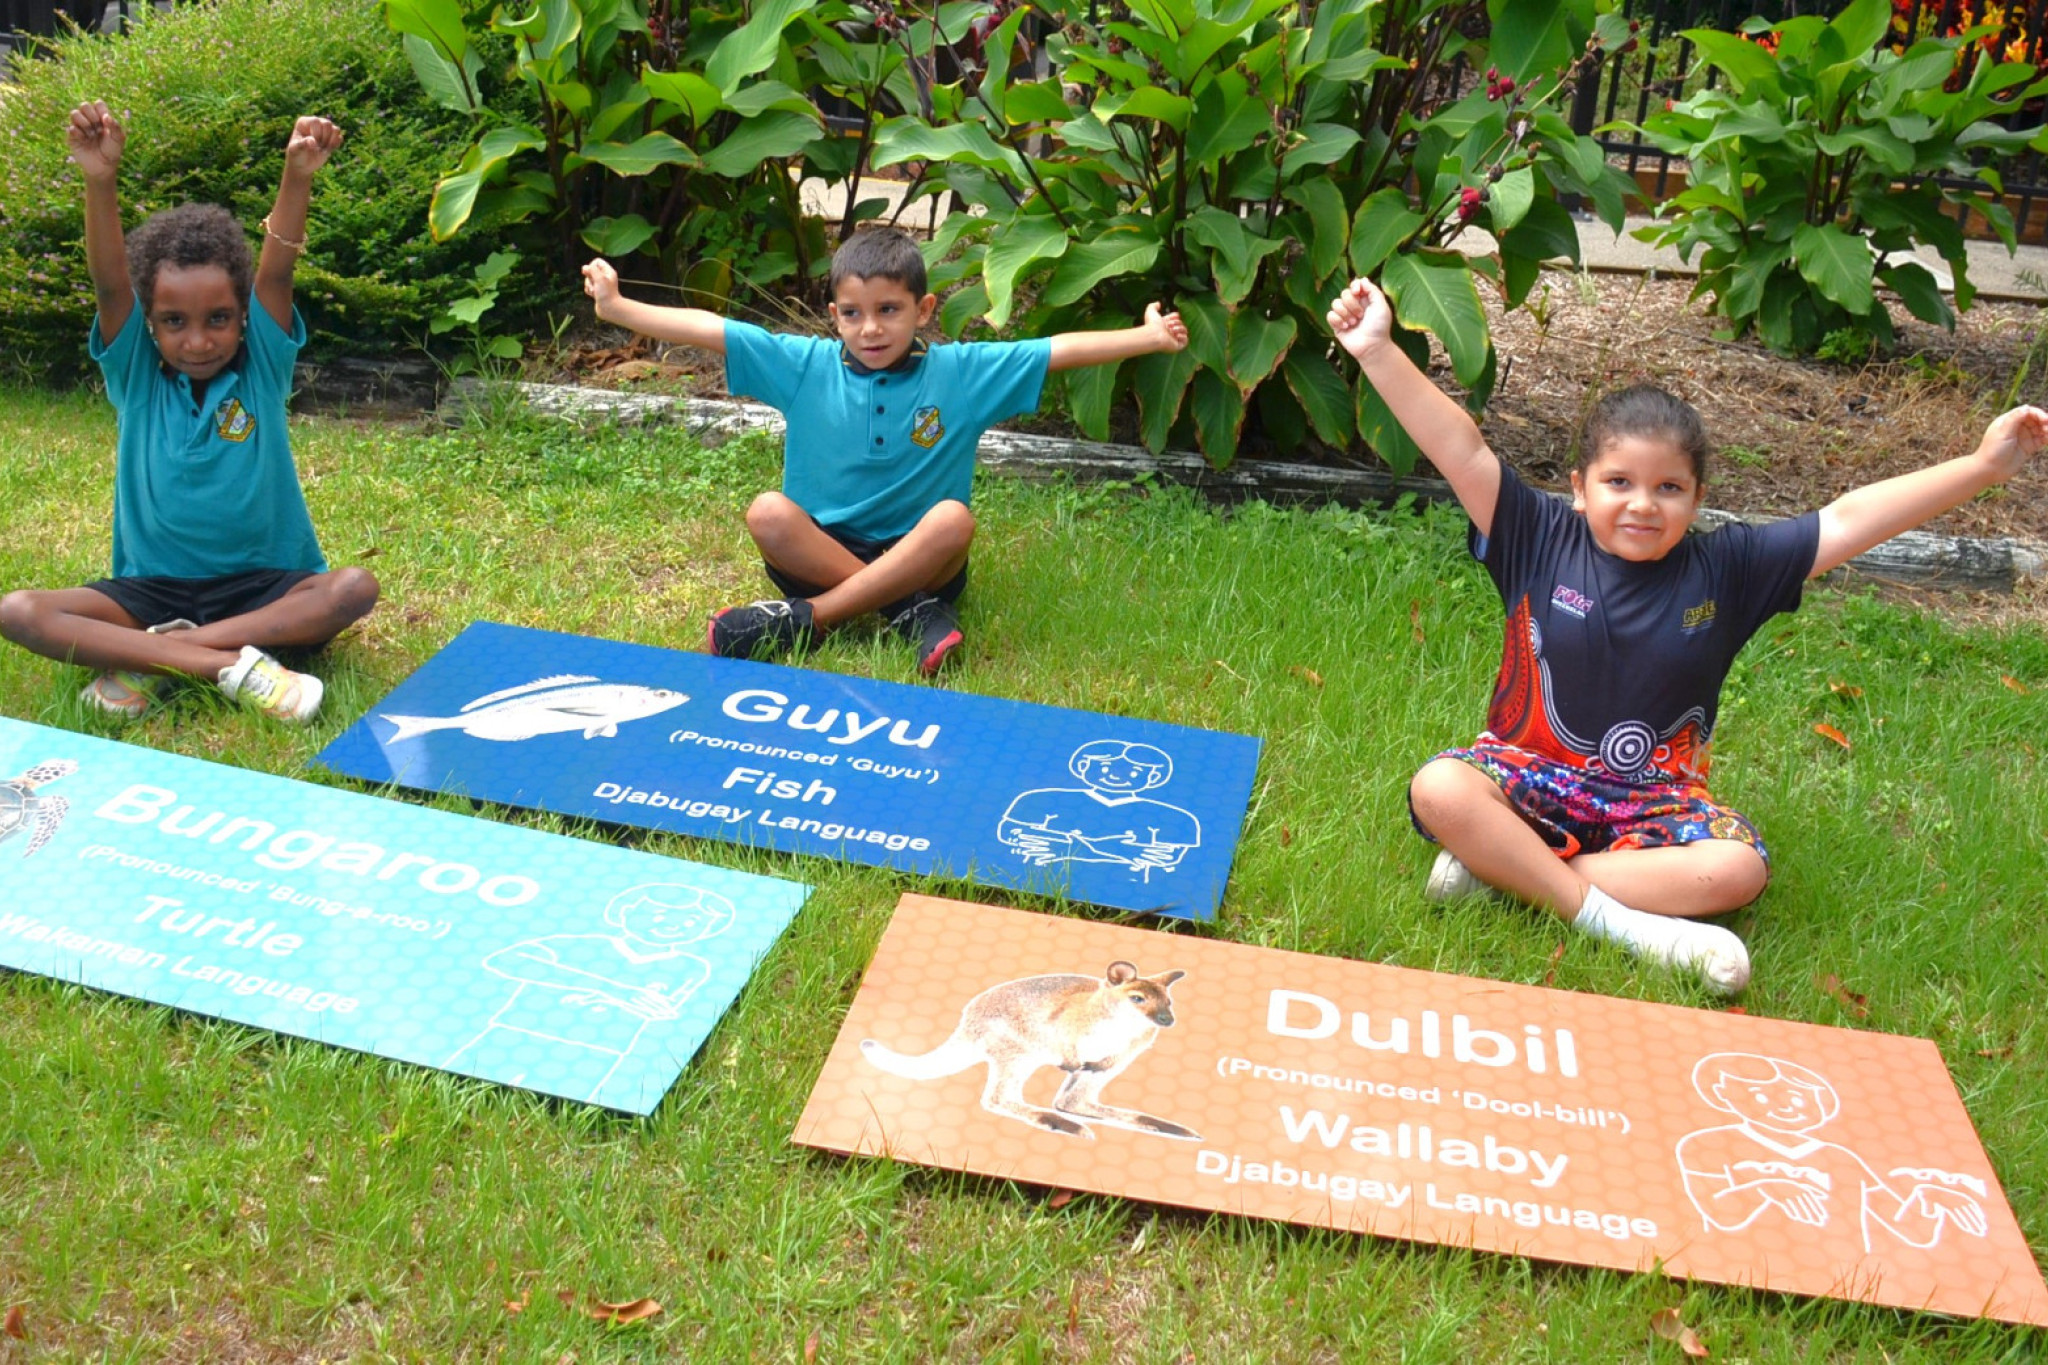 PICTURED: Prep students Sylvia Brumby-Gesa, Heath Hunter and Poppy Hunter with signs showing their language.